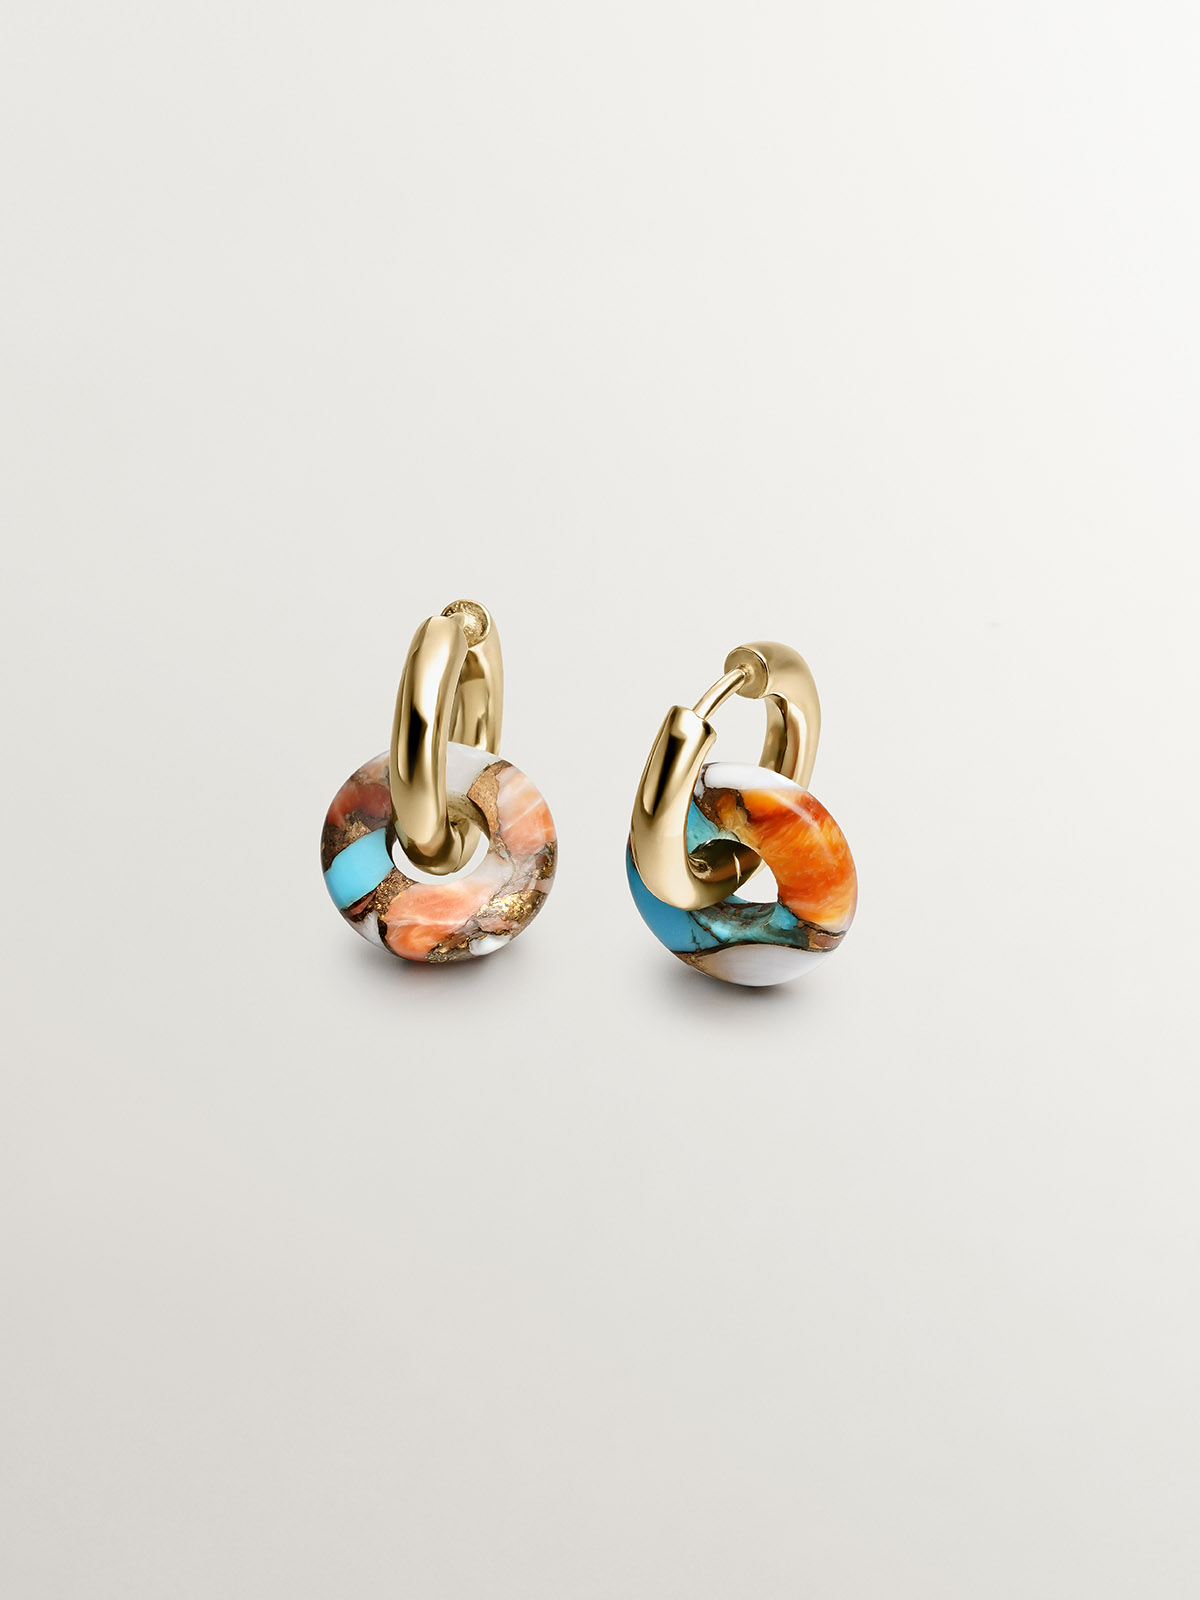 Medium hoop earrings made of 925 silver plated in 18K yellow gold with multicolored turquoise